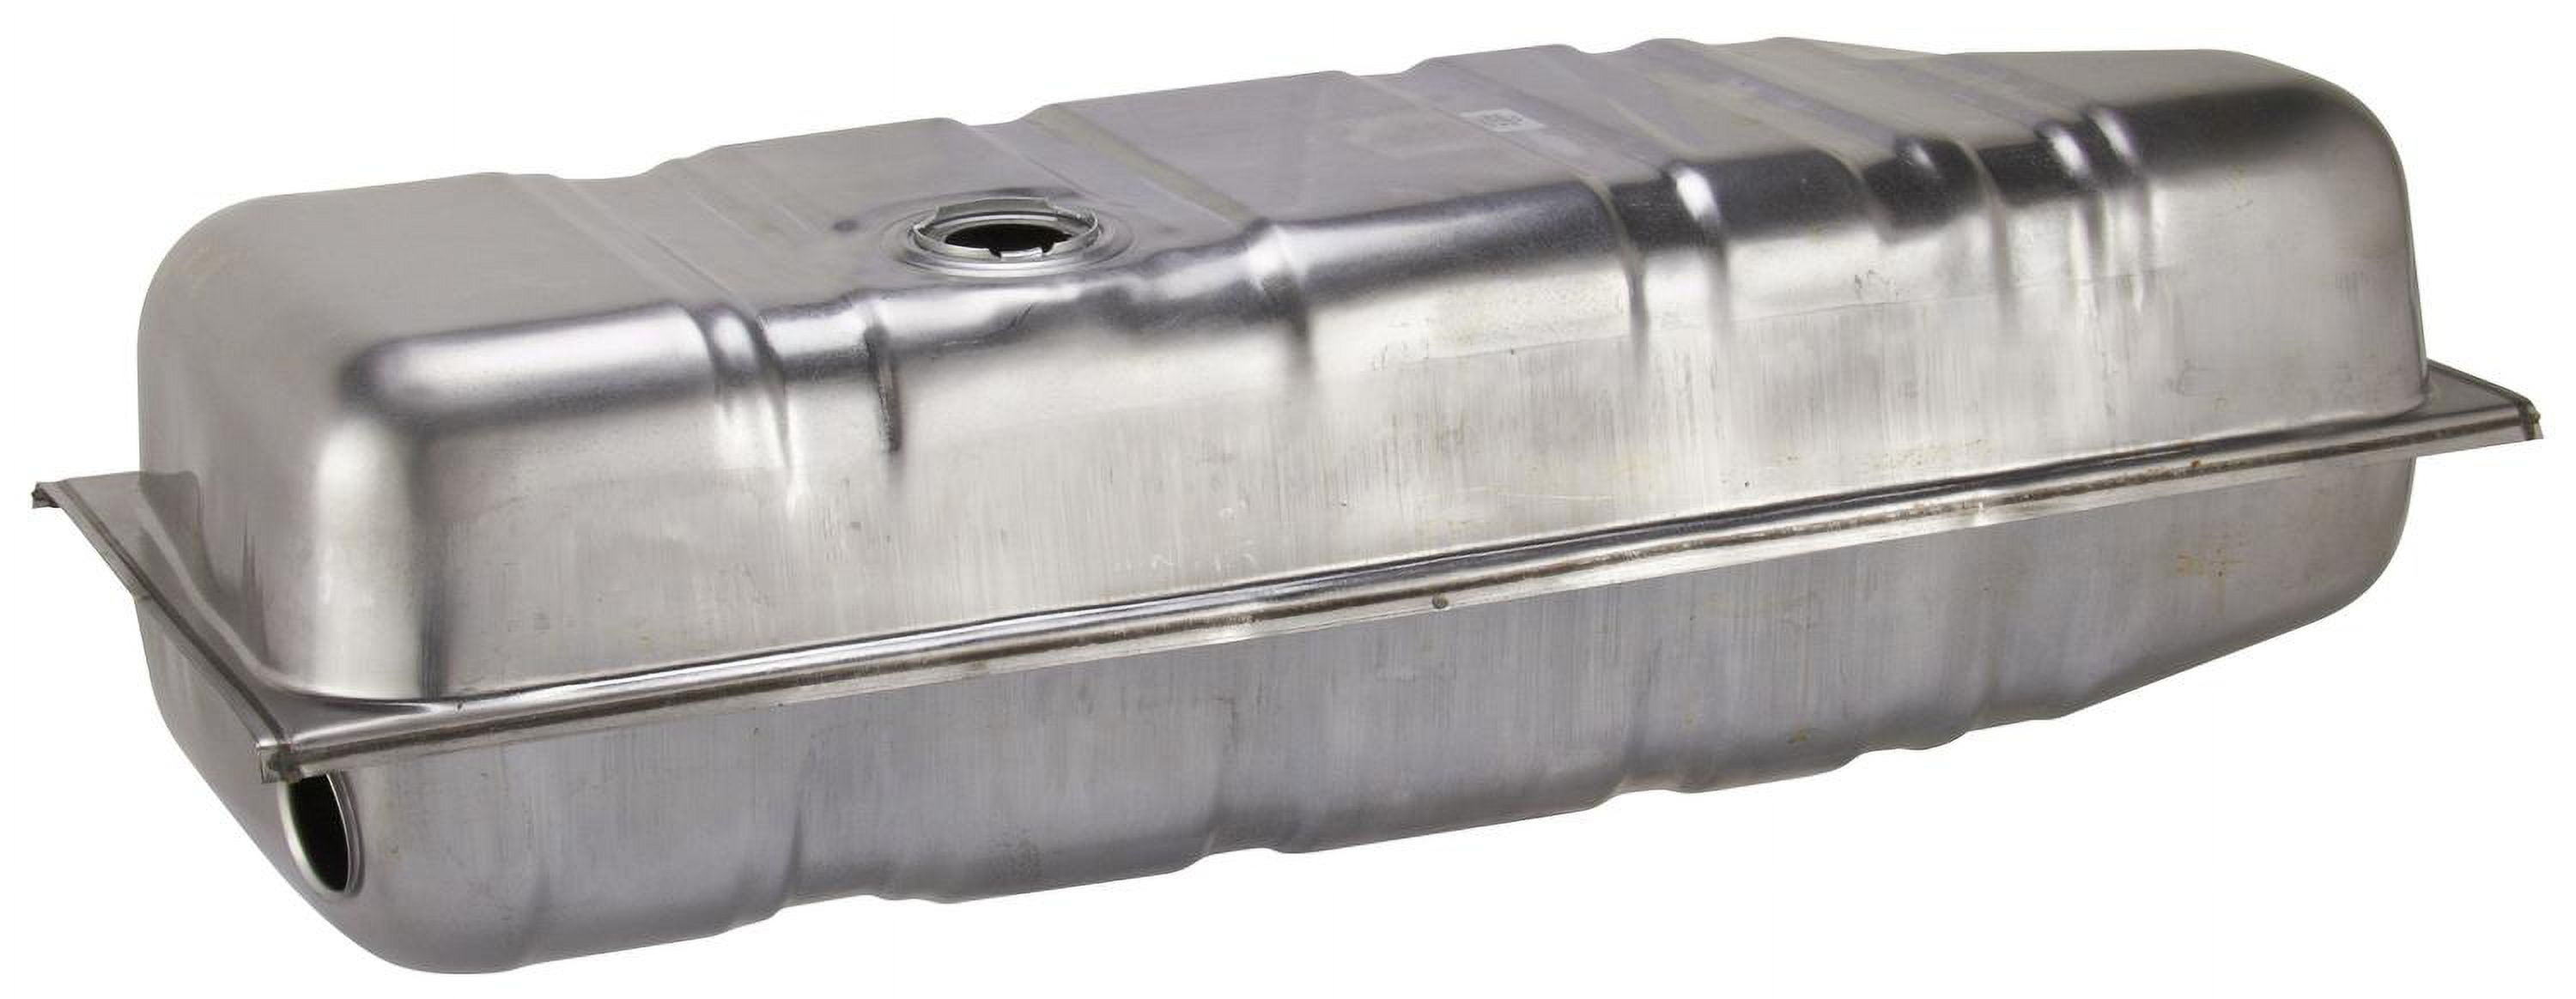 Spectra Premium F47A Classic Fuel Tank Fits select: 1967 FORD GALAXIE,  1967-1970 FORD THUNDERBIRD